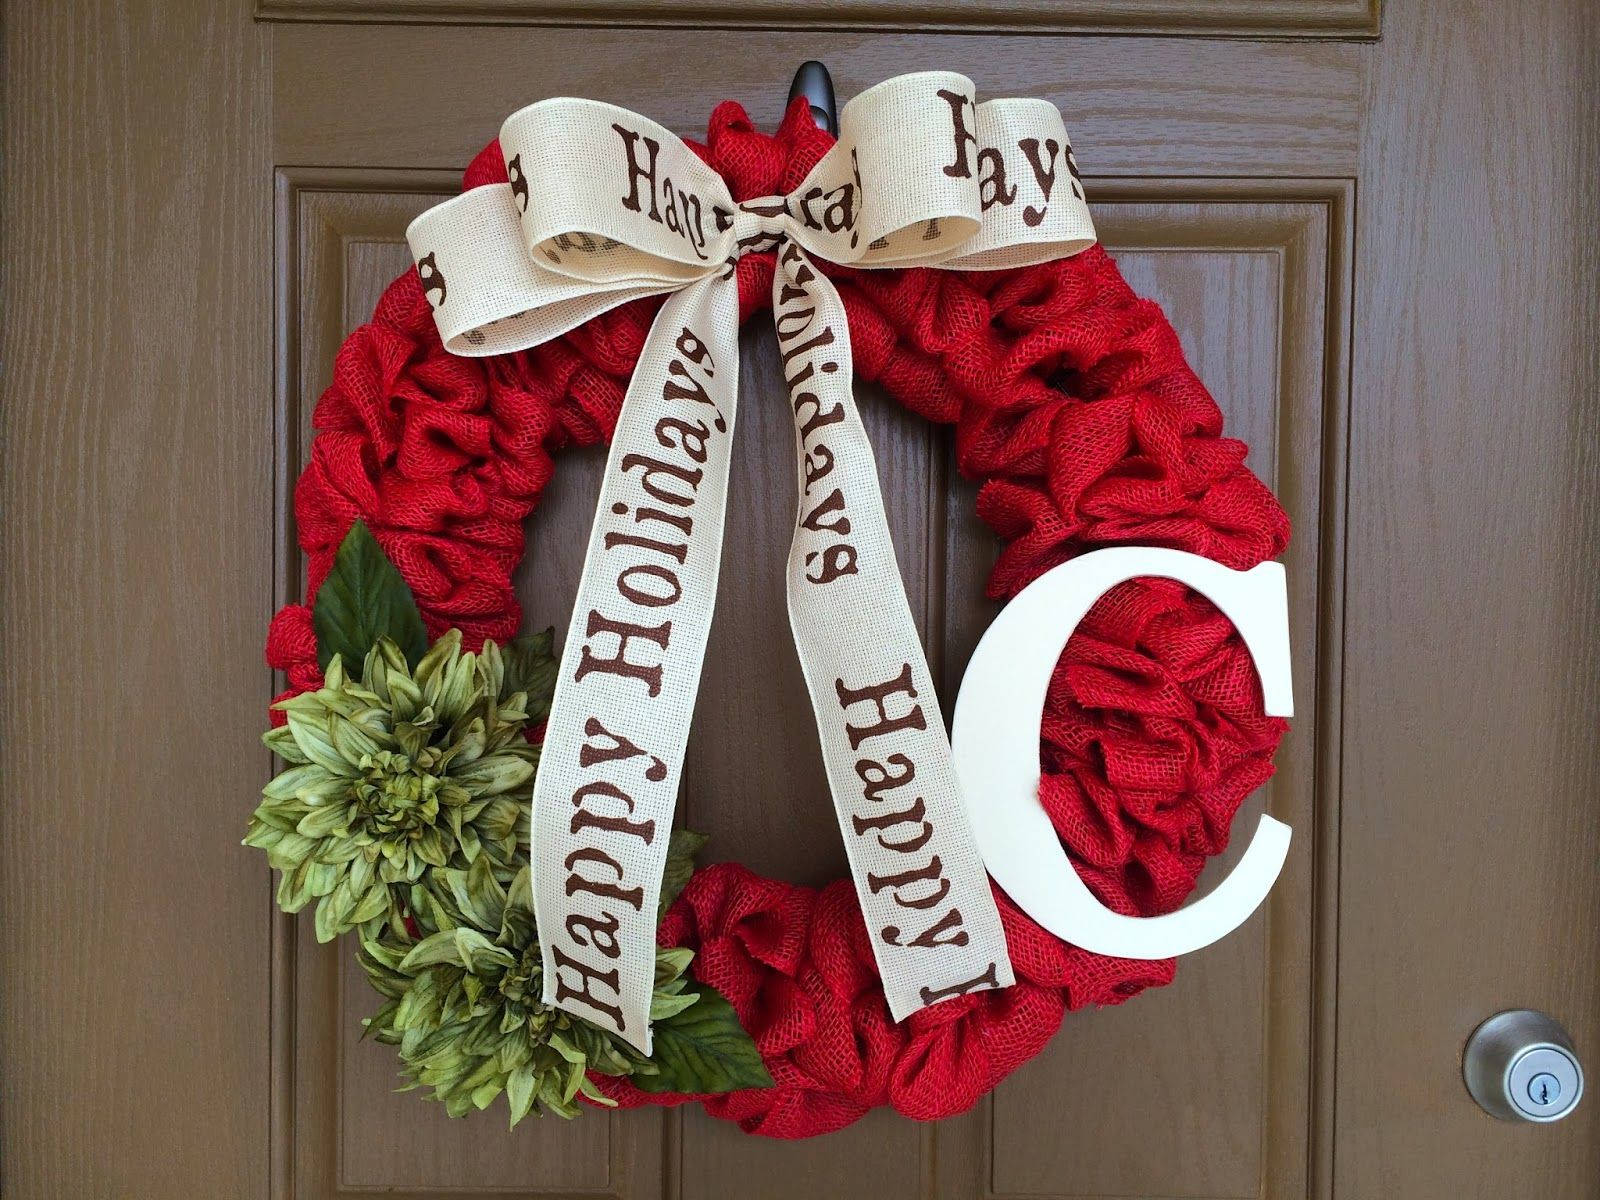 Festive Christmas Wreath With Red Berries Background